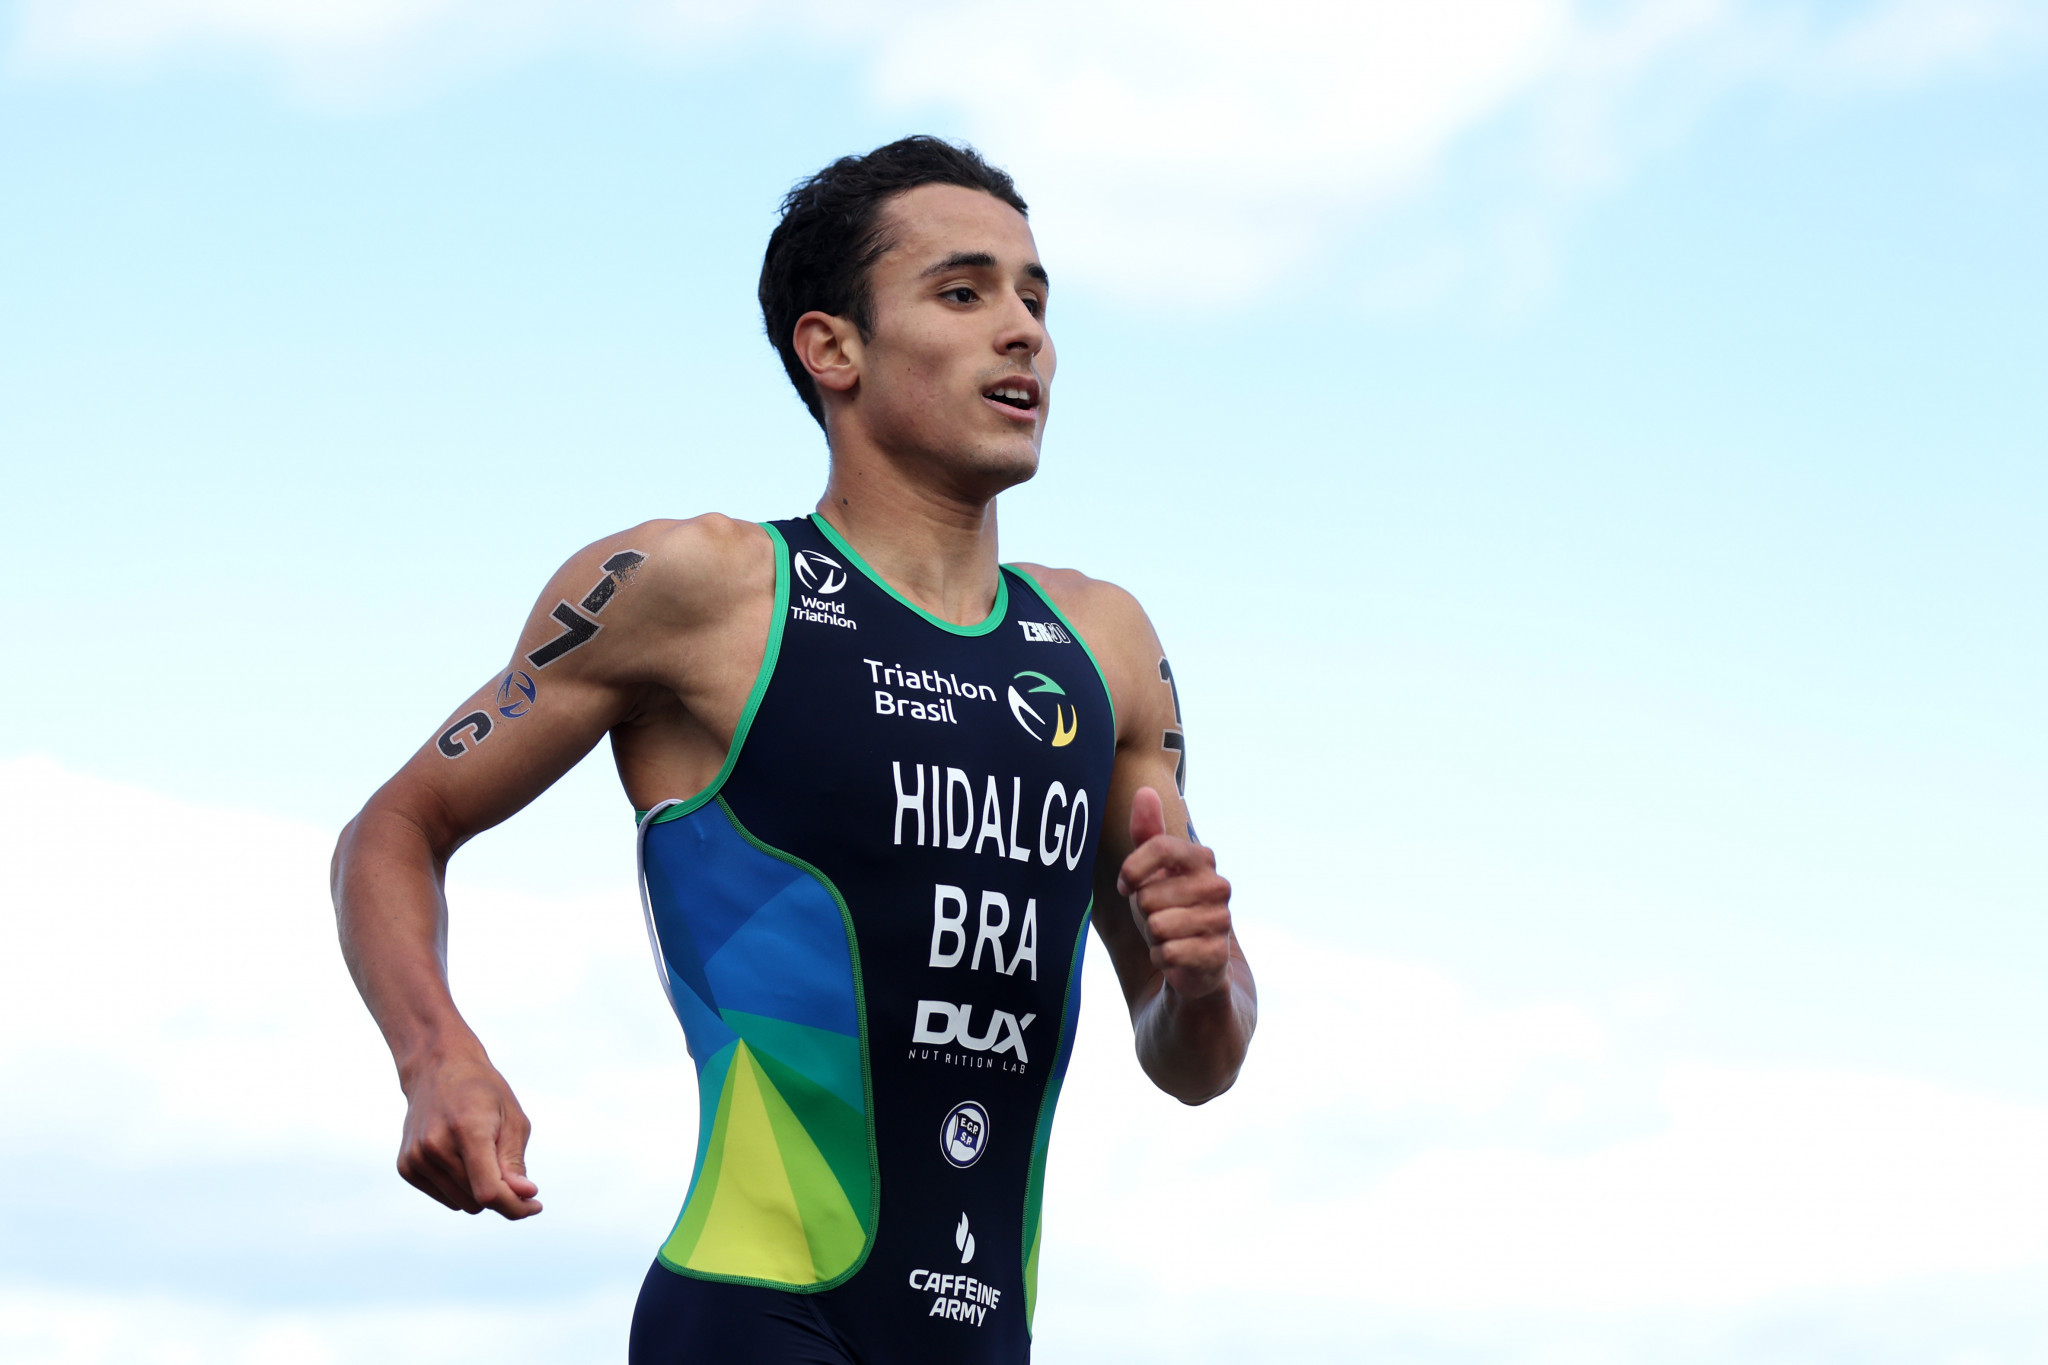 Miguel Hidalgo was fastest in the swim, cycle, and run as he won gold at the World Triathlon Cup in Brazil ©Getty Images